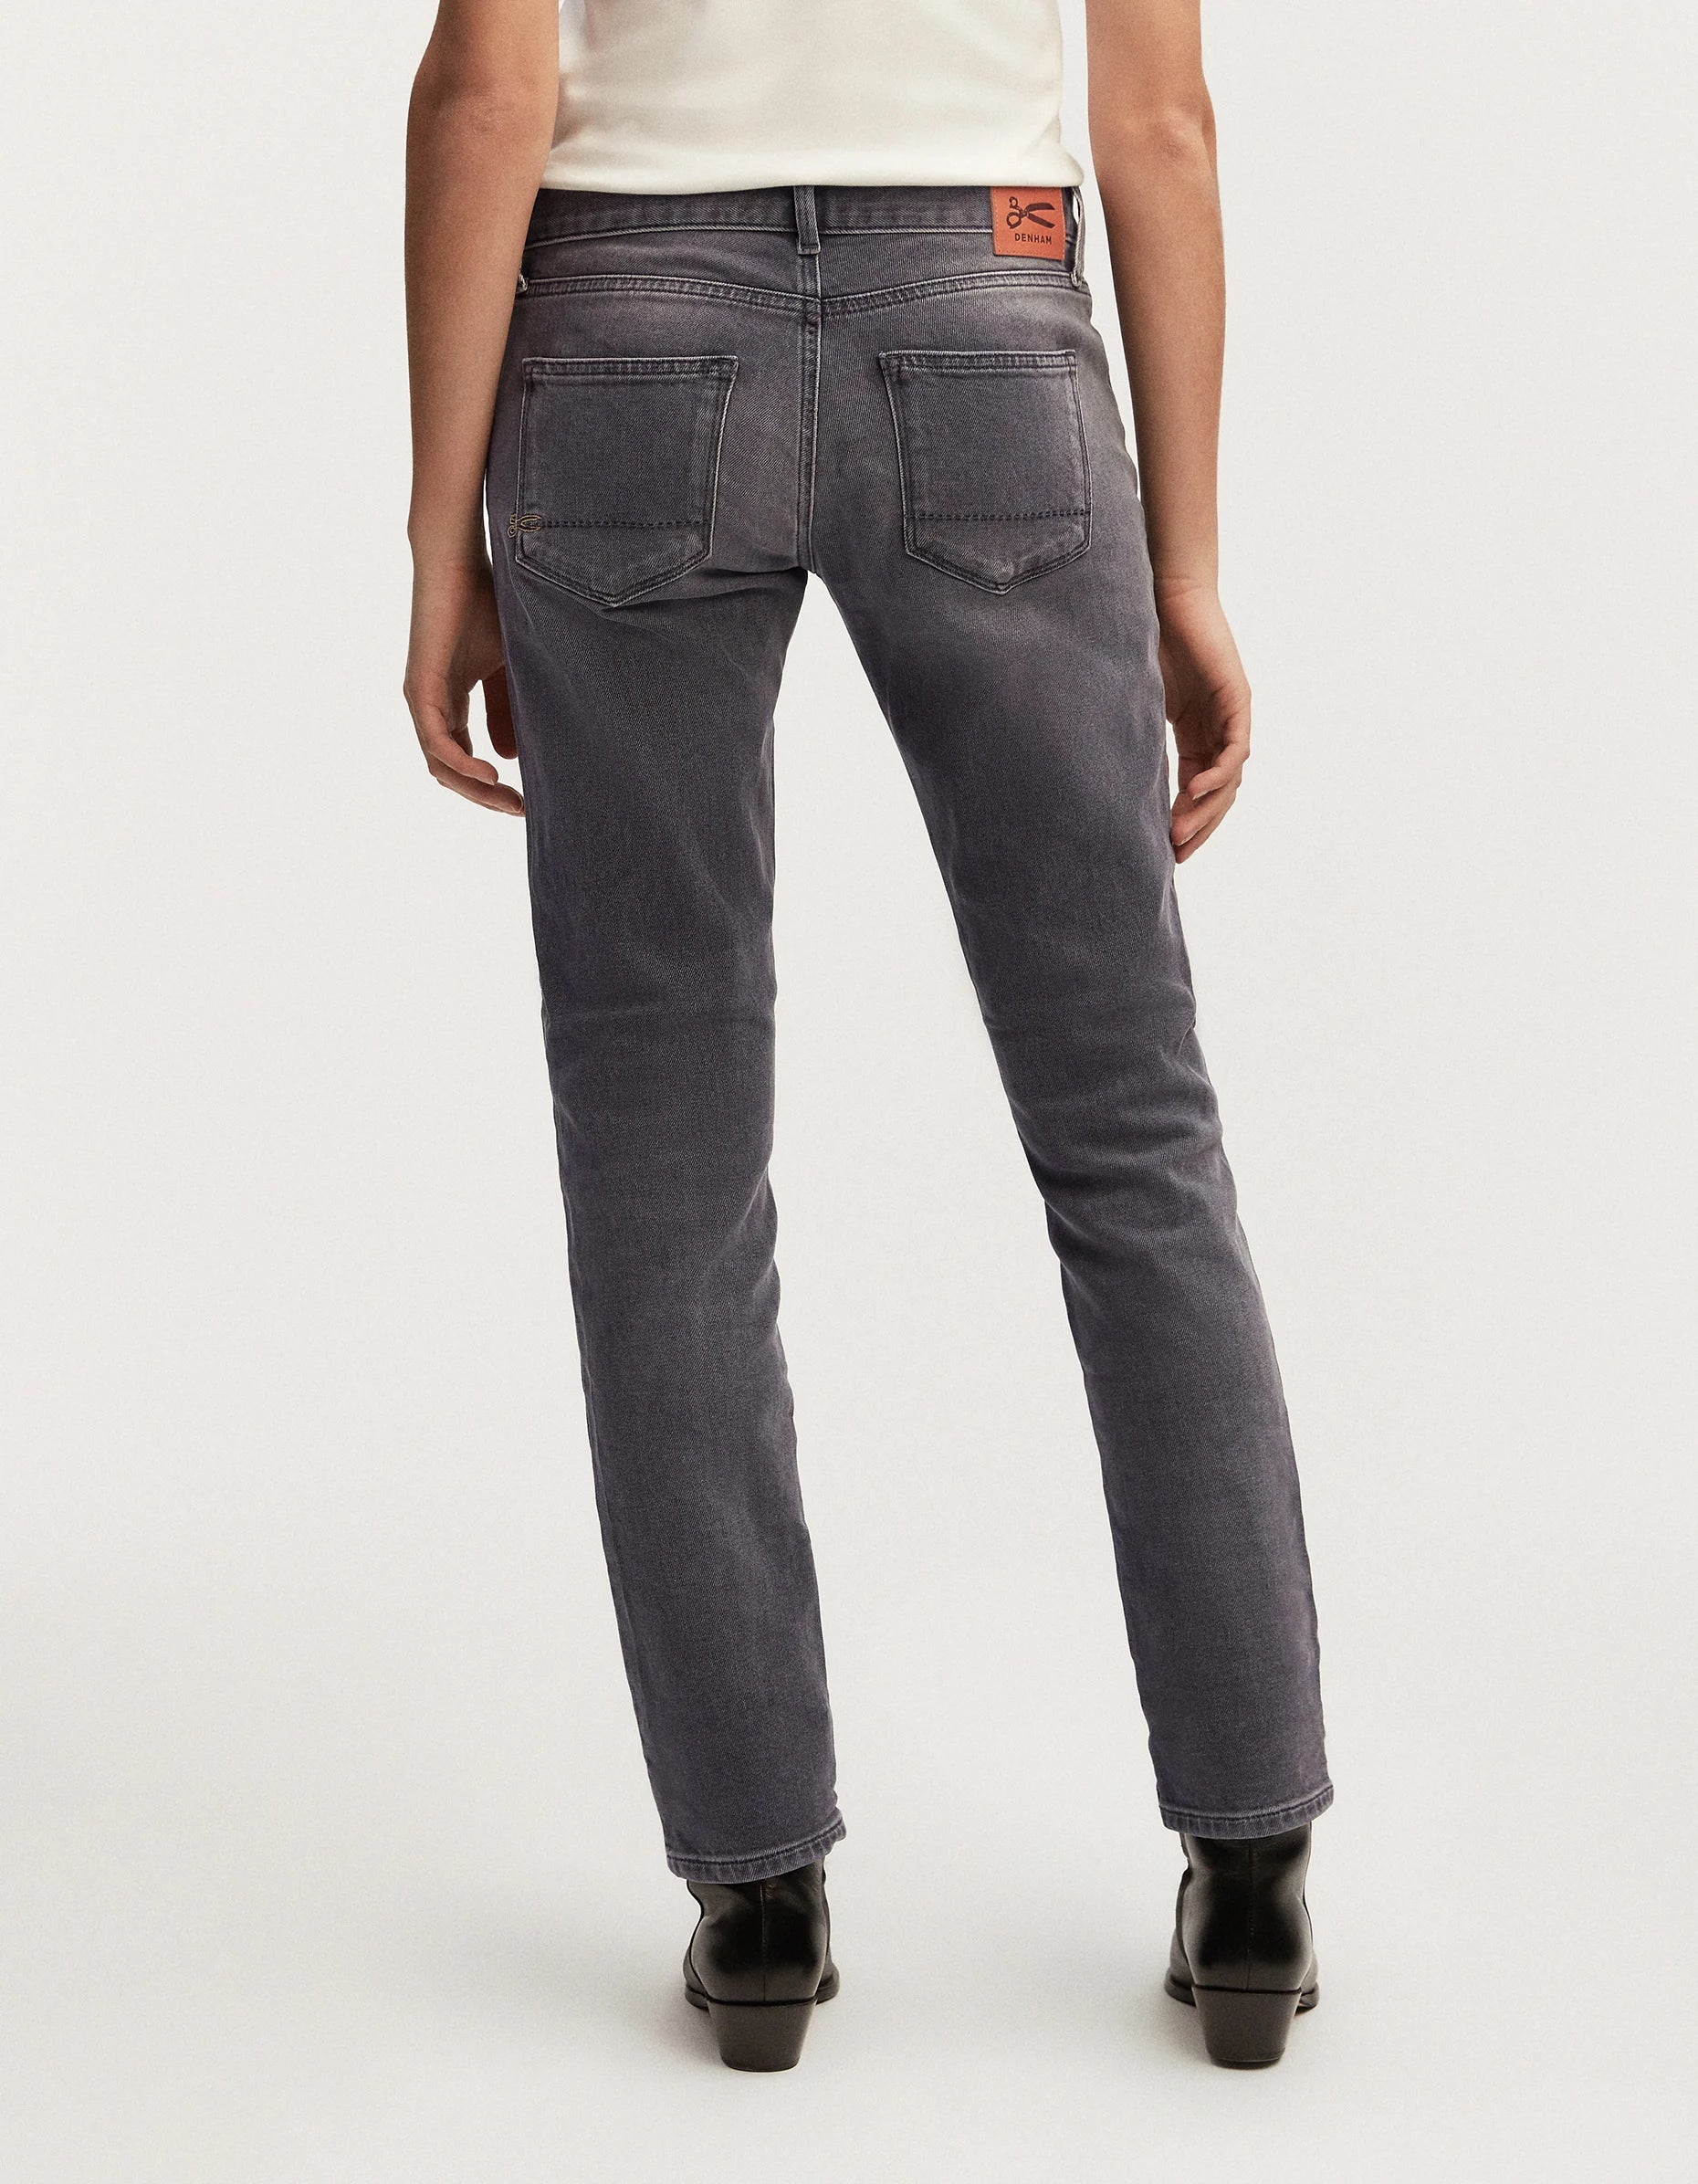 The back view of a woman wearing MONROE - Authentic Grey Wash mid-rise cut jeans from Denham's Authentics range.